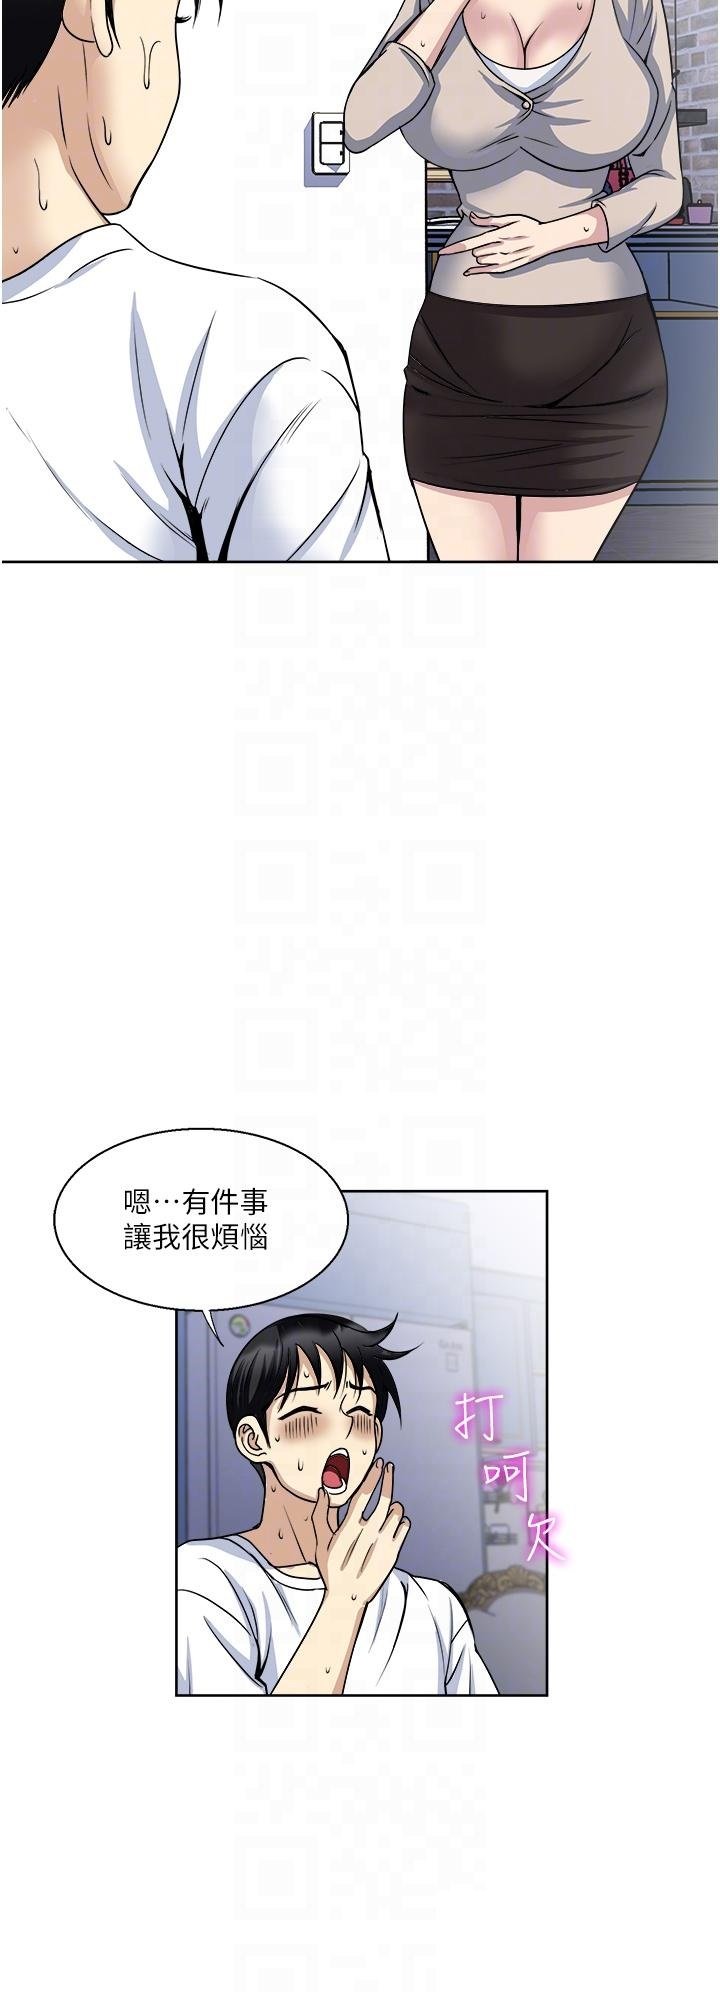 just-once-raw-chap-36-7